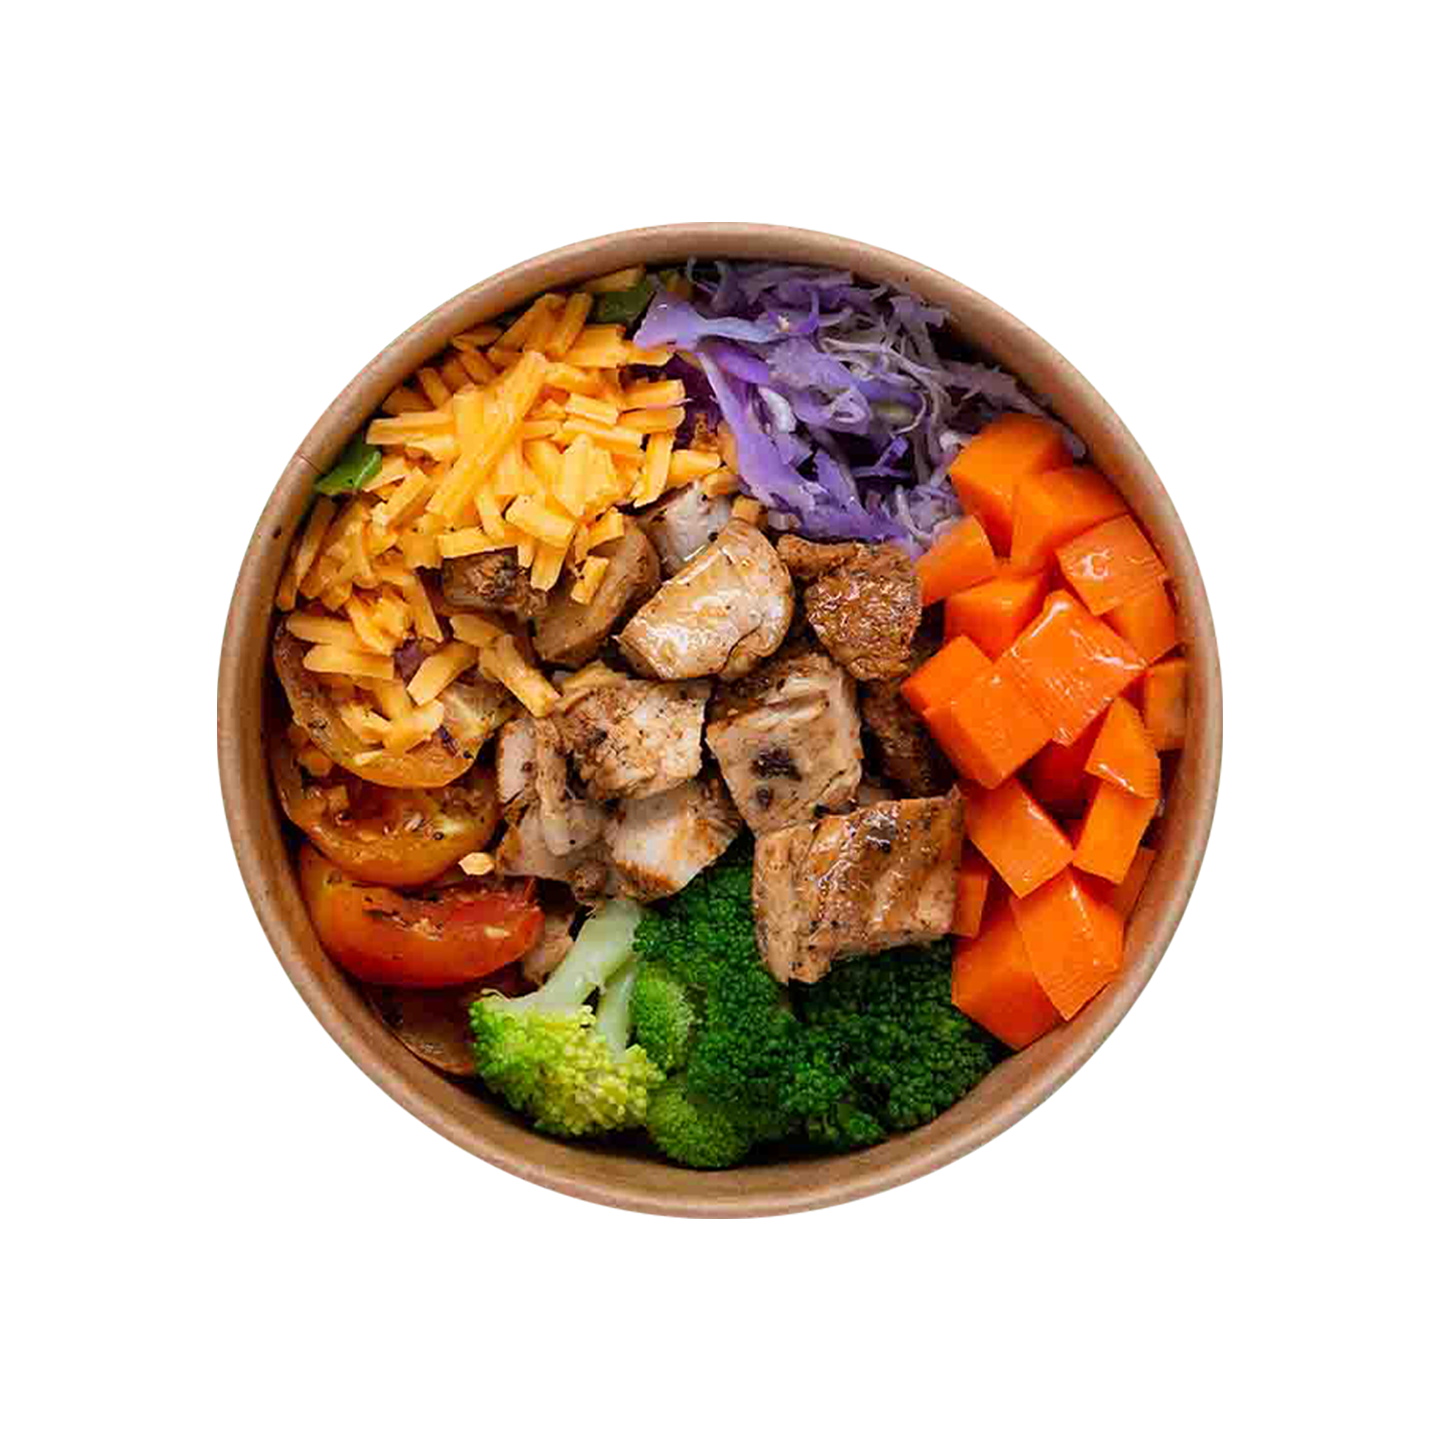 Spiced Chicken Bowl - Meal Plan